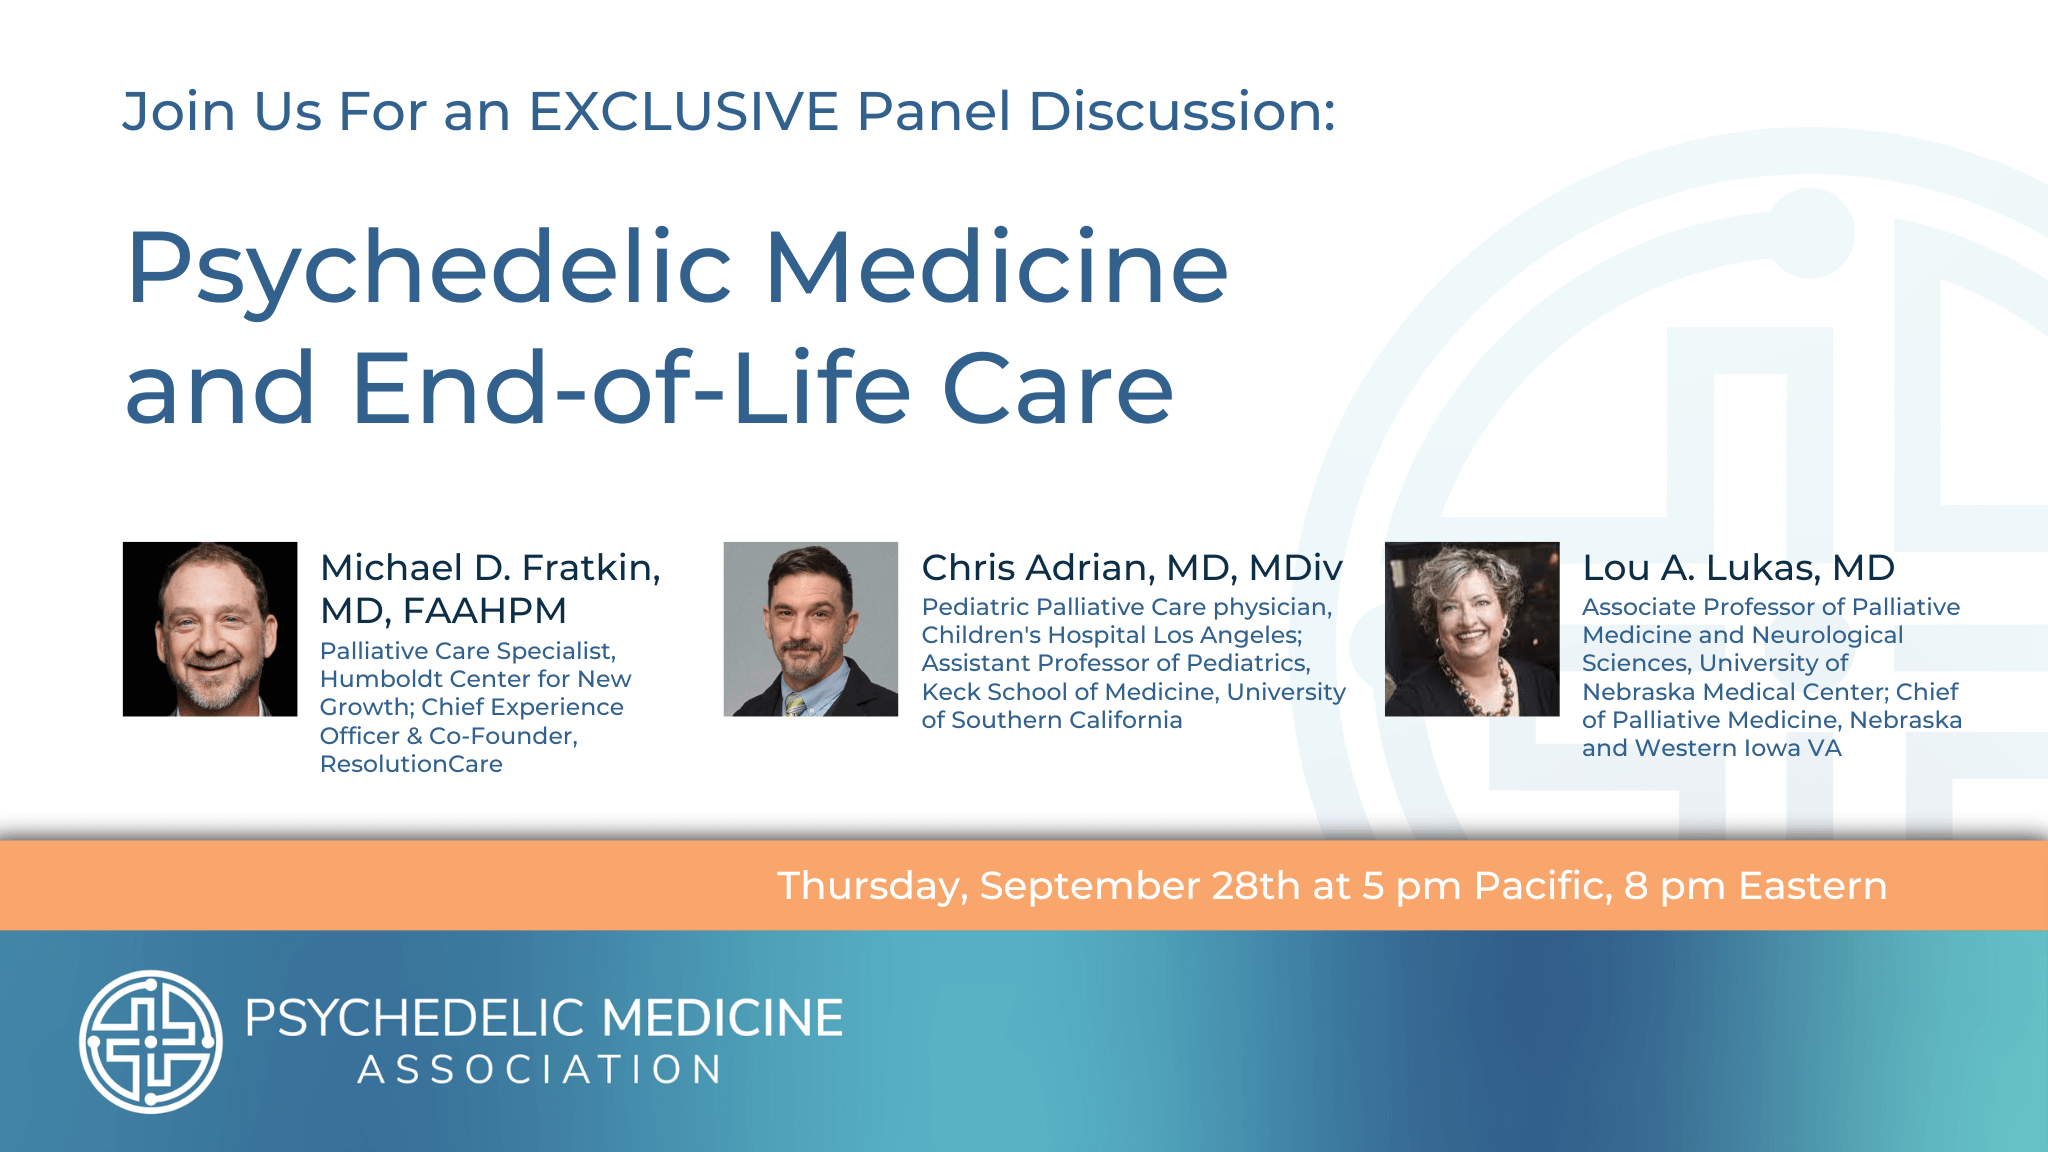 Psychedelic Medicine and End-of-Life Care with Michael D. Fratkin, Chris Adrian, and Lou A. Lukas